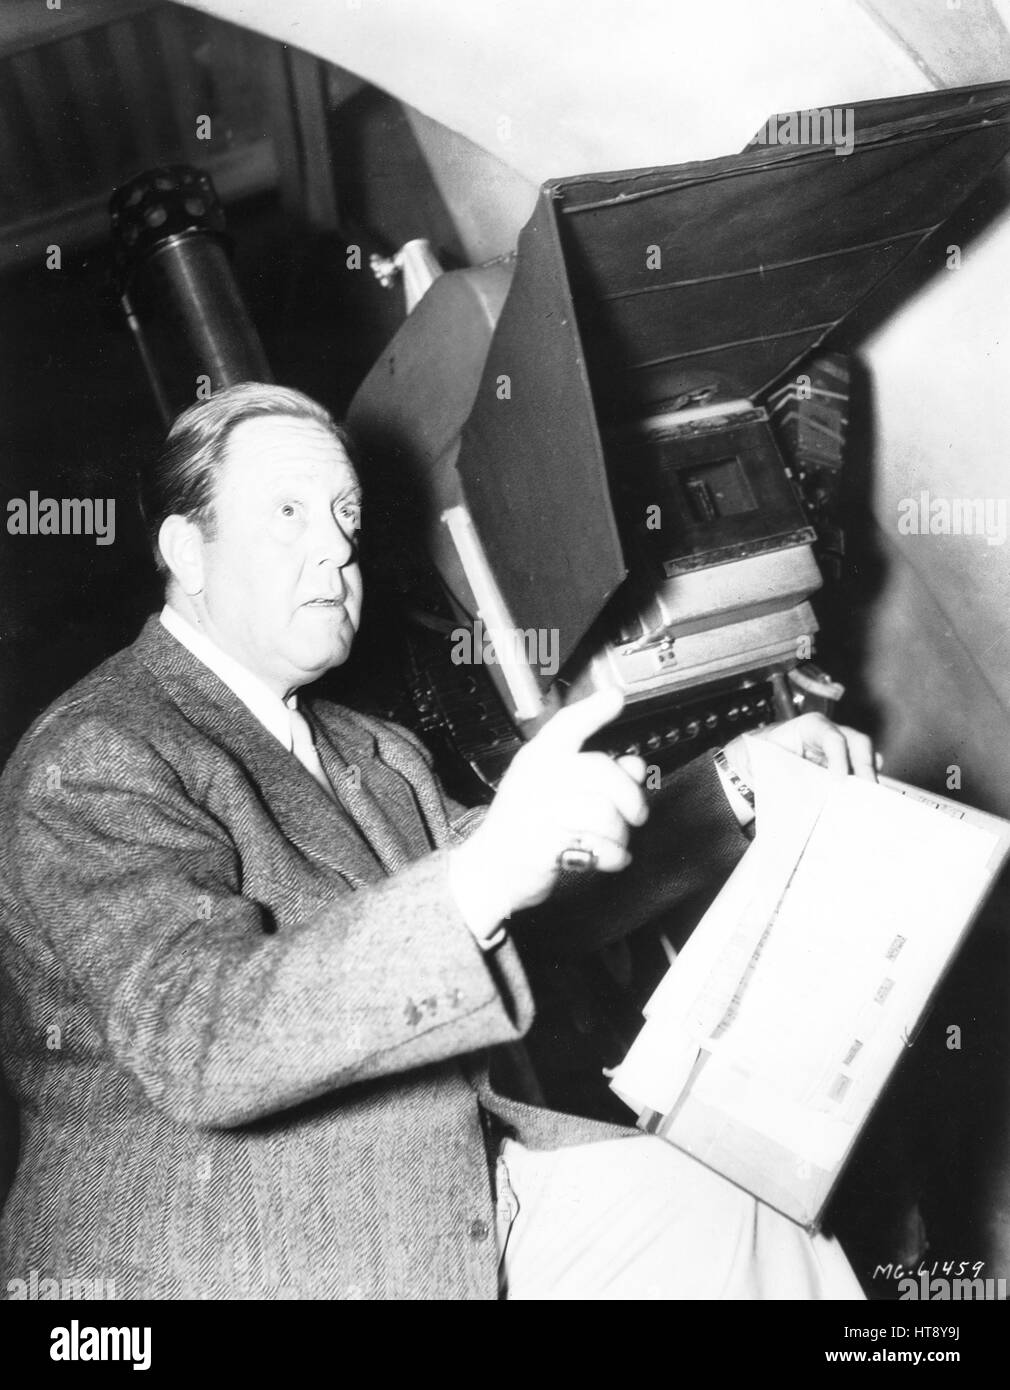 'The candid cameraman has caught some of Hollywood's most famous directors at work. Director Robert Z. Leonard, once a singer himself, absent-mindedly beats time as Jeanette MacDonald and Allan Jones sing in Rudolf Friml's 'The Firefly' on an M-G-M sound stage.' Stock Photo